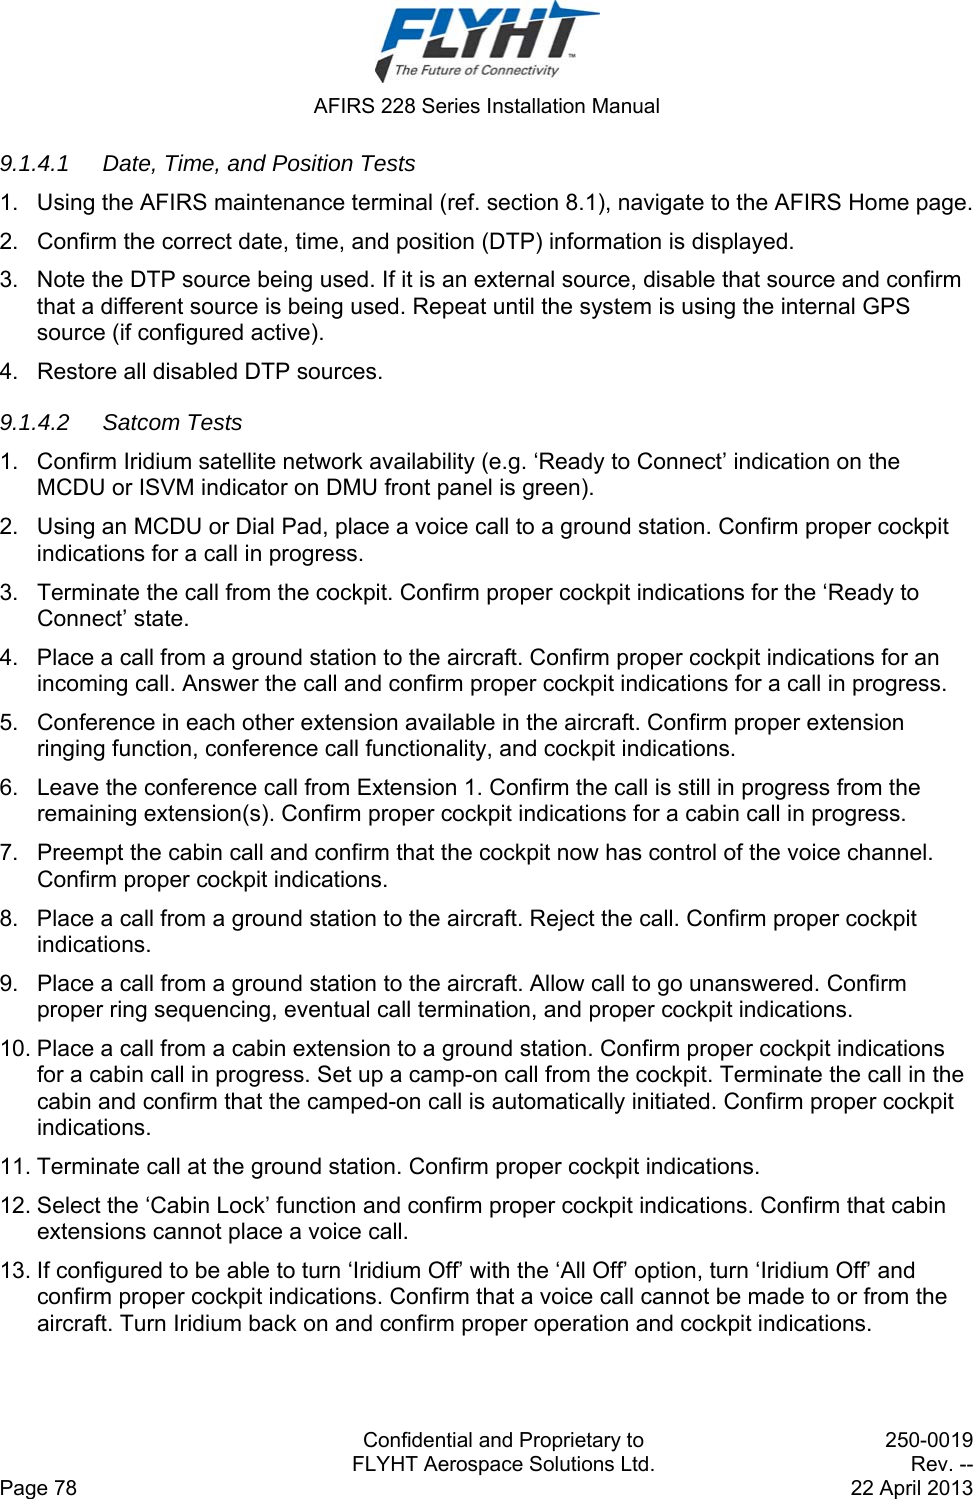  AFIRS 228 Series Installation Manual   Confidential and Proprietary to  250-0019   FLYHT Aerospace Solutions Ltd.  Rev. -- Page 78    22 April 2013 9.1.4.1  Date, Time, and Position Tests 1.  Using the AFIRS maintenance terminal (ref. section 8.1), navigate to the AFIRS Home page. 2.  Confirm the correct date, time, and position (DTP) information is displayed. 3.  Note the DTP source being used. If it is an external source, disable that source and confirm that a different source is being used. Repeat until the system is using the internal GPS source (if configured active). 4.  Restore all disabled DTP sources. 9.1.4.2 Satcom Tests 1.  Confirm Iridium satellite network availability (e.g. ‘Ready to Connect’ indication on the MCDU or ISVM indicator on DMU front panel is green). 2.  Using an MCDU or Dial Pad, place a voice call to a ground station. Confirm proper cockpit indications for a call in progress. 3.  Terminate the call from the cockpit. Confirm proper cockpit indications for the ‘Ready to Connect’ state. 4.  Place a call from a ground station to the aircraft. Confirm proper cockpit indications for an incoming call. Answer the call and confirm proper cockpit indications for a call in progress. 5.  Conference in each other extension available in the aircraft. Confirm proper extension ringing function, conference call functionality, and cockpit indications. 6.  Leave the conference call from Extension 1. Confirm the call is still in progress from the remaining extension(s). Confirm proper cockpit indications for a cabin call in progress. 7.  Preempt the cabin call and confirm that the cockpit now has control of the voice channel. Confirm proper cockpit indications. 8.  Place a call from a ground station to the aircraft. Reject the call. Confirm proper cockpit indications. 9.  Place a call from a ground station to the aircraft. Allow call to go unanswered. Confirm proper ring sequencing, eventual call termination, and proper cockpit indications. 10. Place a call from a cabin extension to a ground station. Confirm proper cockpit indications for a cabin call in progress. Set up a camp-on call from the cockpit. Terminate the call in the cabin and confirm that the camped-on call is automatically initiated. Confirm proper cockpit indications. 11. Terminate call at the ground station. Confirm proper cockpit indications. 12. Select the ‘Cabin Lock’ function and confirm proper cockpit indications. Confirm that cabin extensions cannot place a voice call. 13. If configured to be able to turn ‘Iridium Off’ with the ‘All Off’ option, turn ‘Iridium Off’ and confirm proper cockpit indications. Confirm that a voice call cannot be made to or from the aircraft. Turn Iridium back on and confirm proper operation and cockpit indications. 